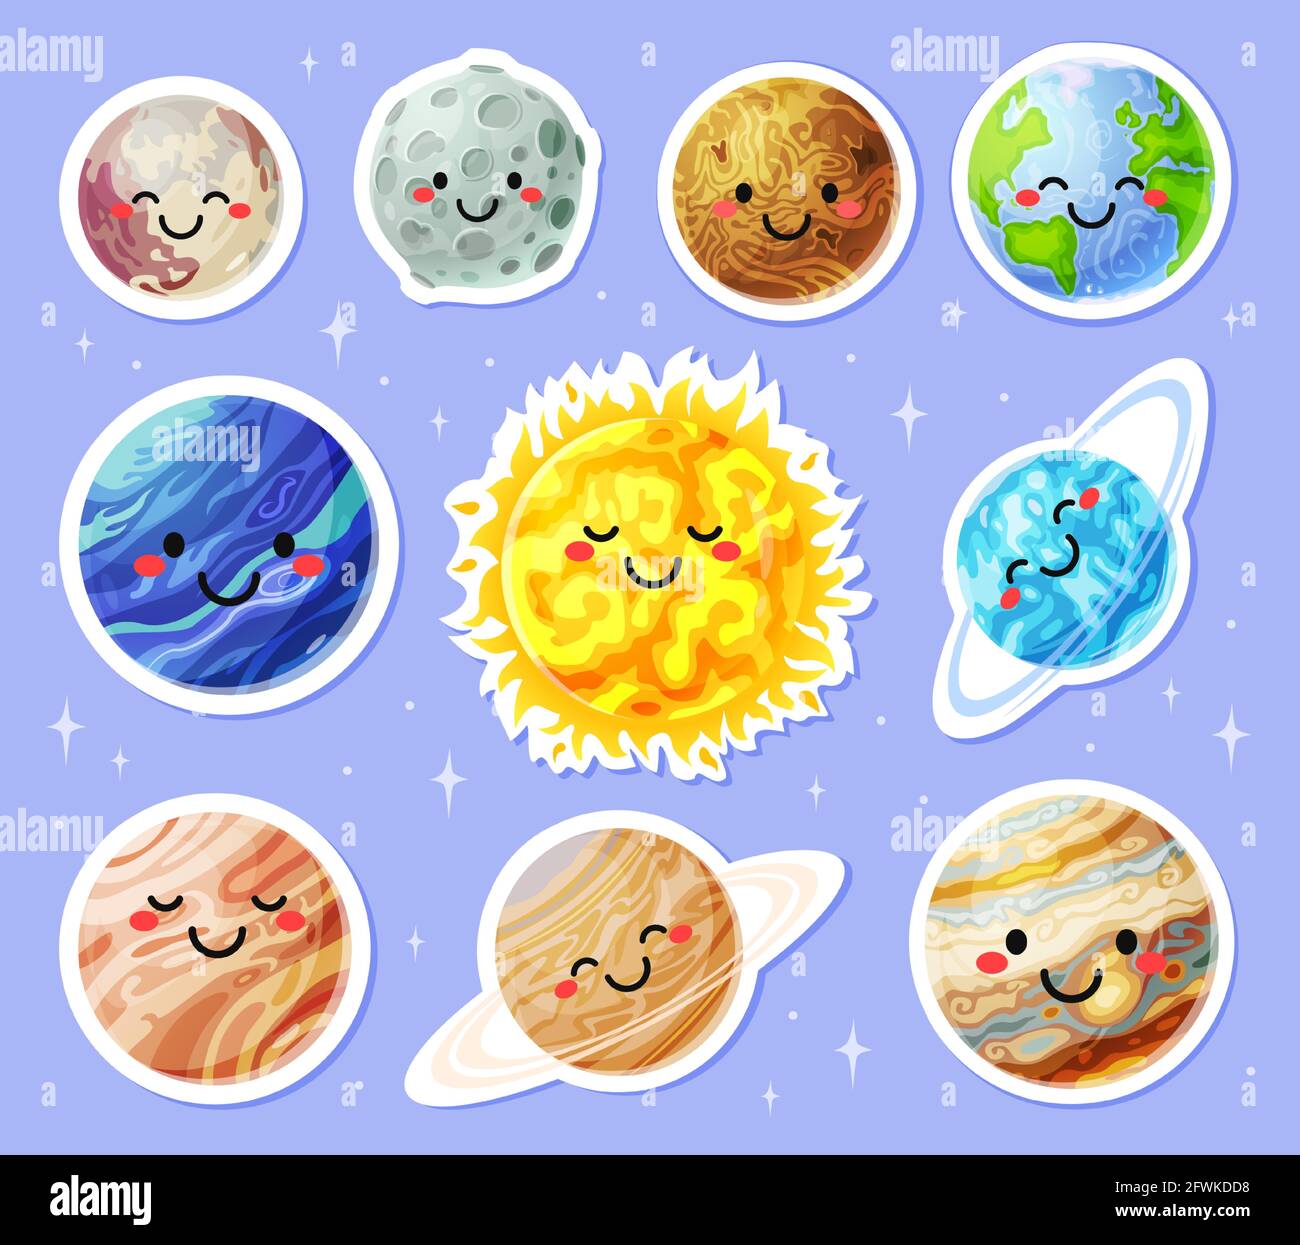 Planet stickers. Cartoon planets with cute faces. Sun, earth, moon, mars sticker. Funny solar system planets characters for kids vector set. Astronomy science education for children Stock Vector